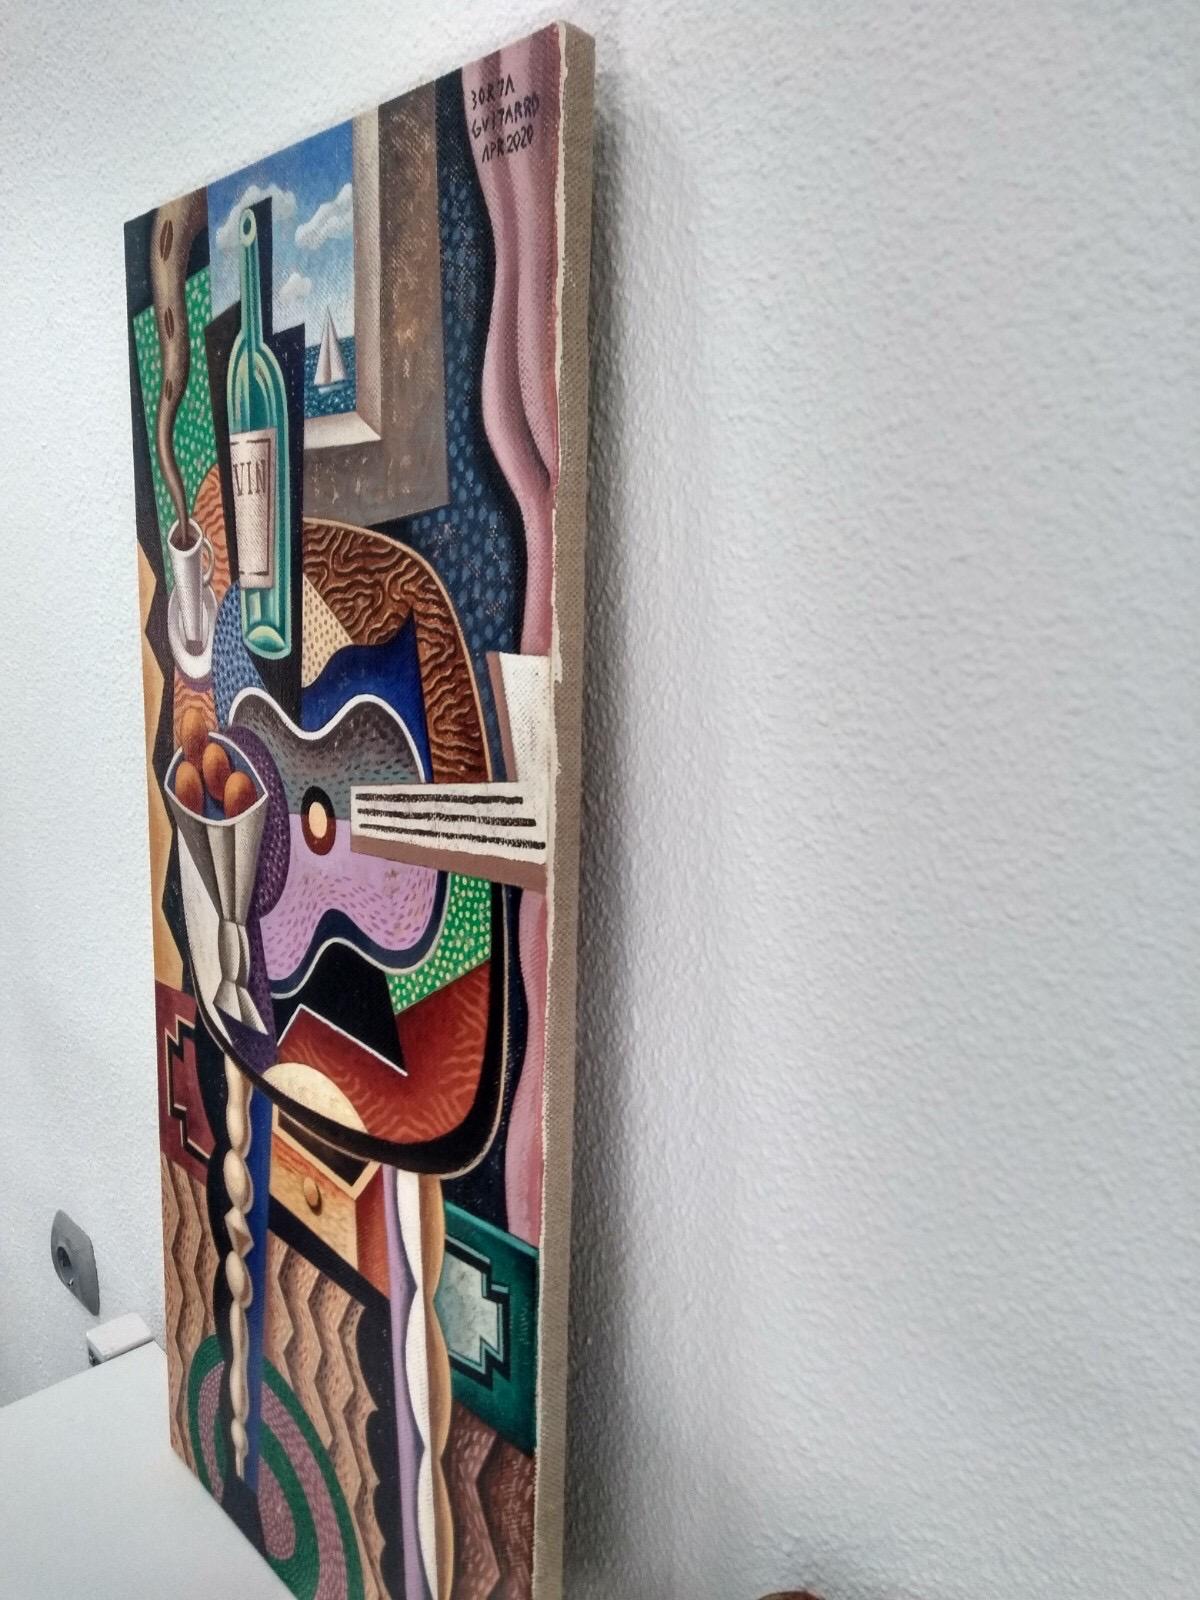 The original cubism painting by Borja Guijarro is painted on canvas. His modern style makes for an interesting and unique piece of contemporary art. It is signed  and ready to be displayed.  

Borja is well known in the world of illustration, where